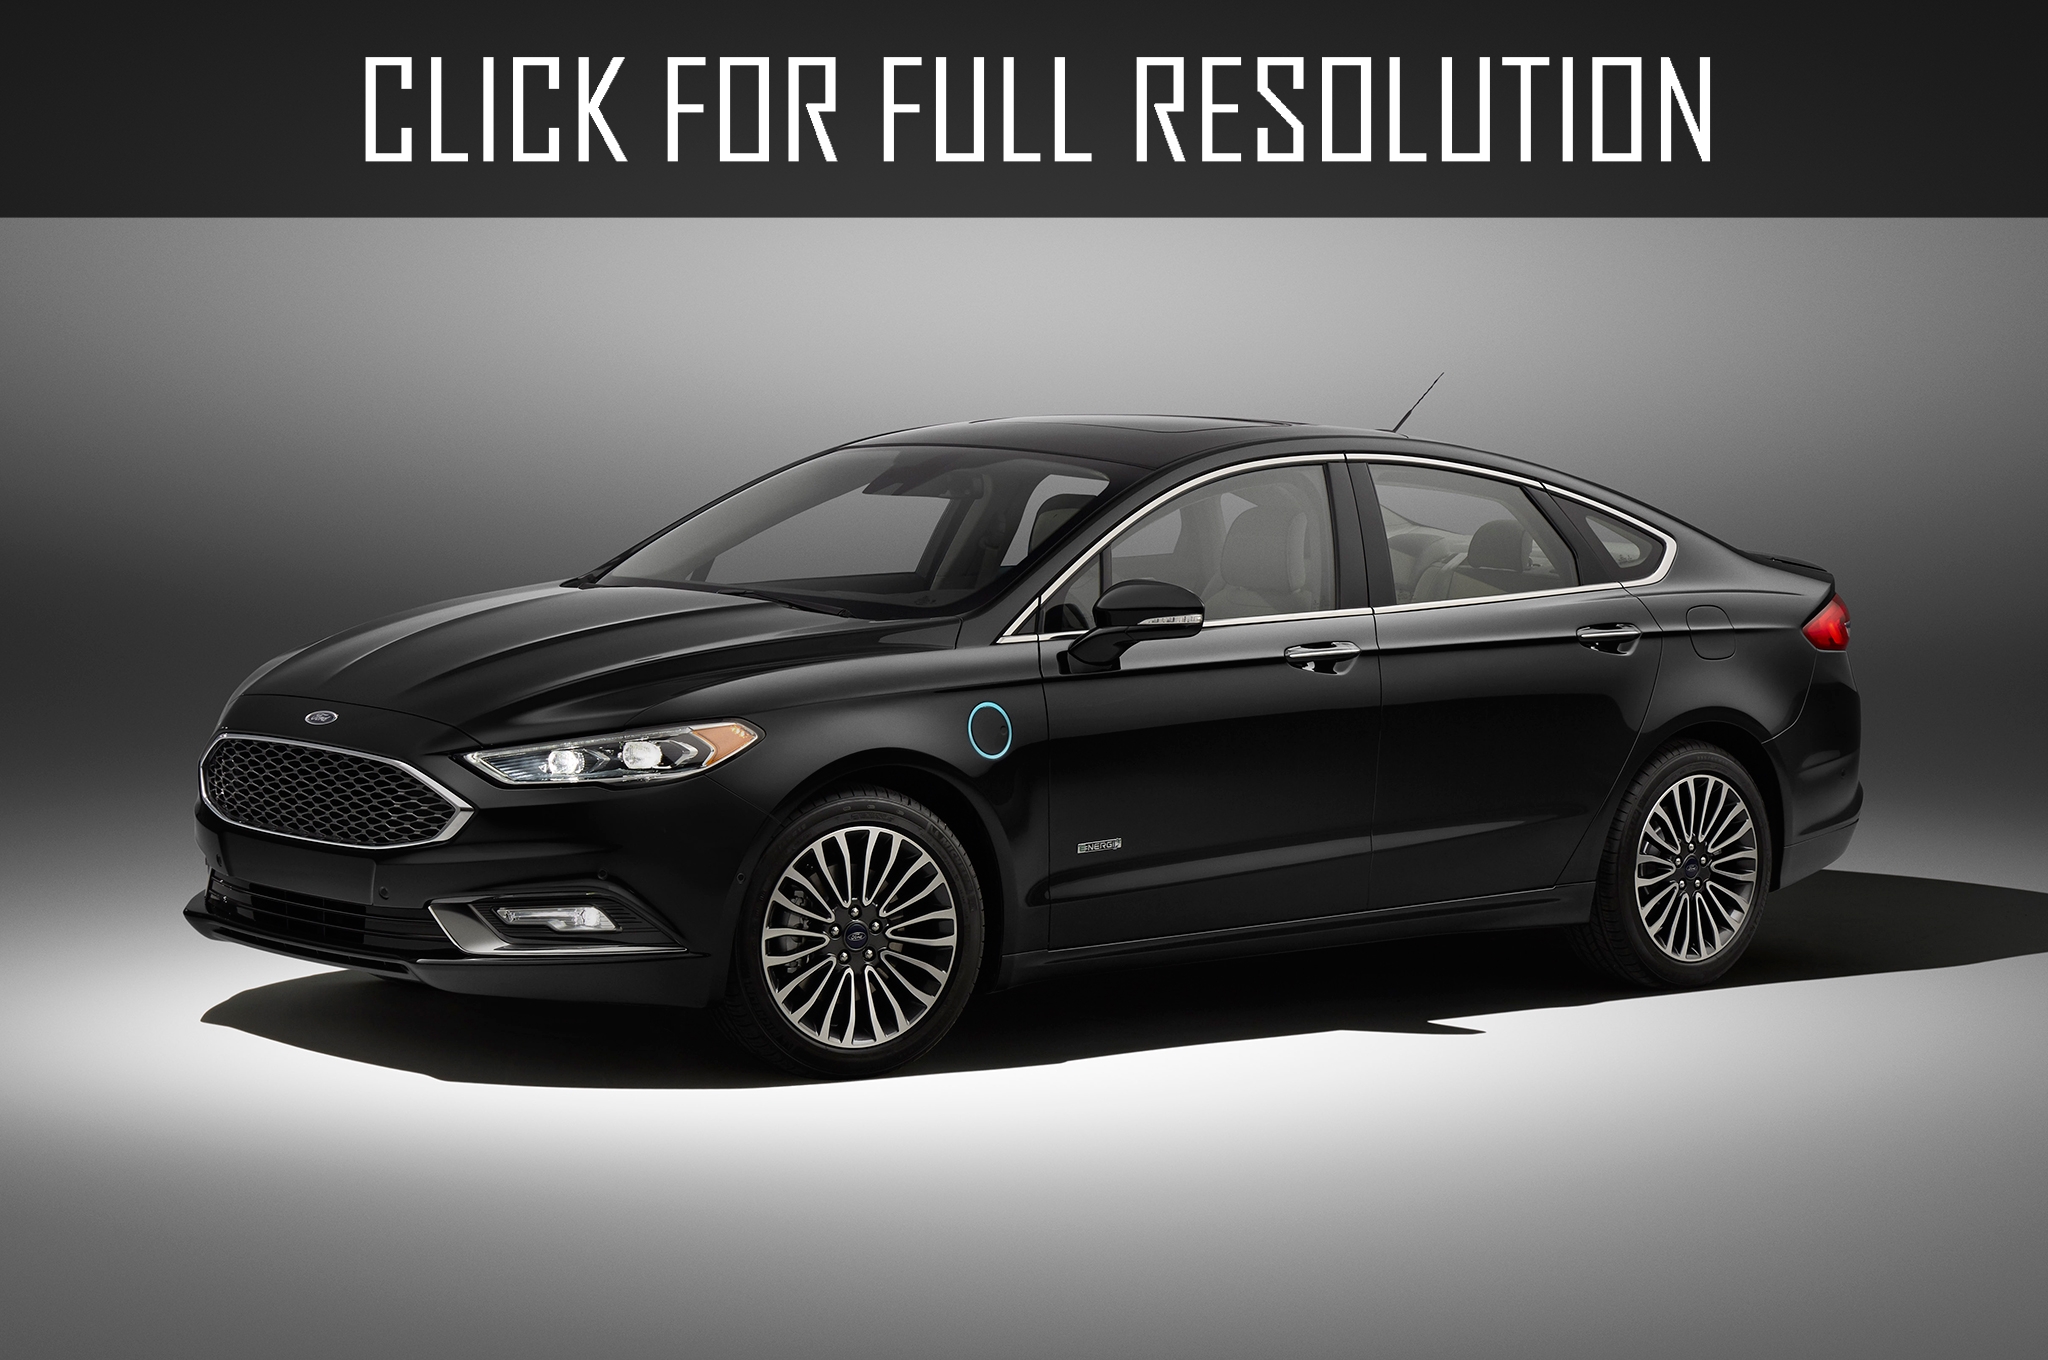 2015 Ford Fusion Energy